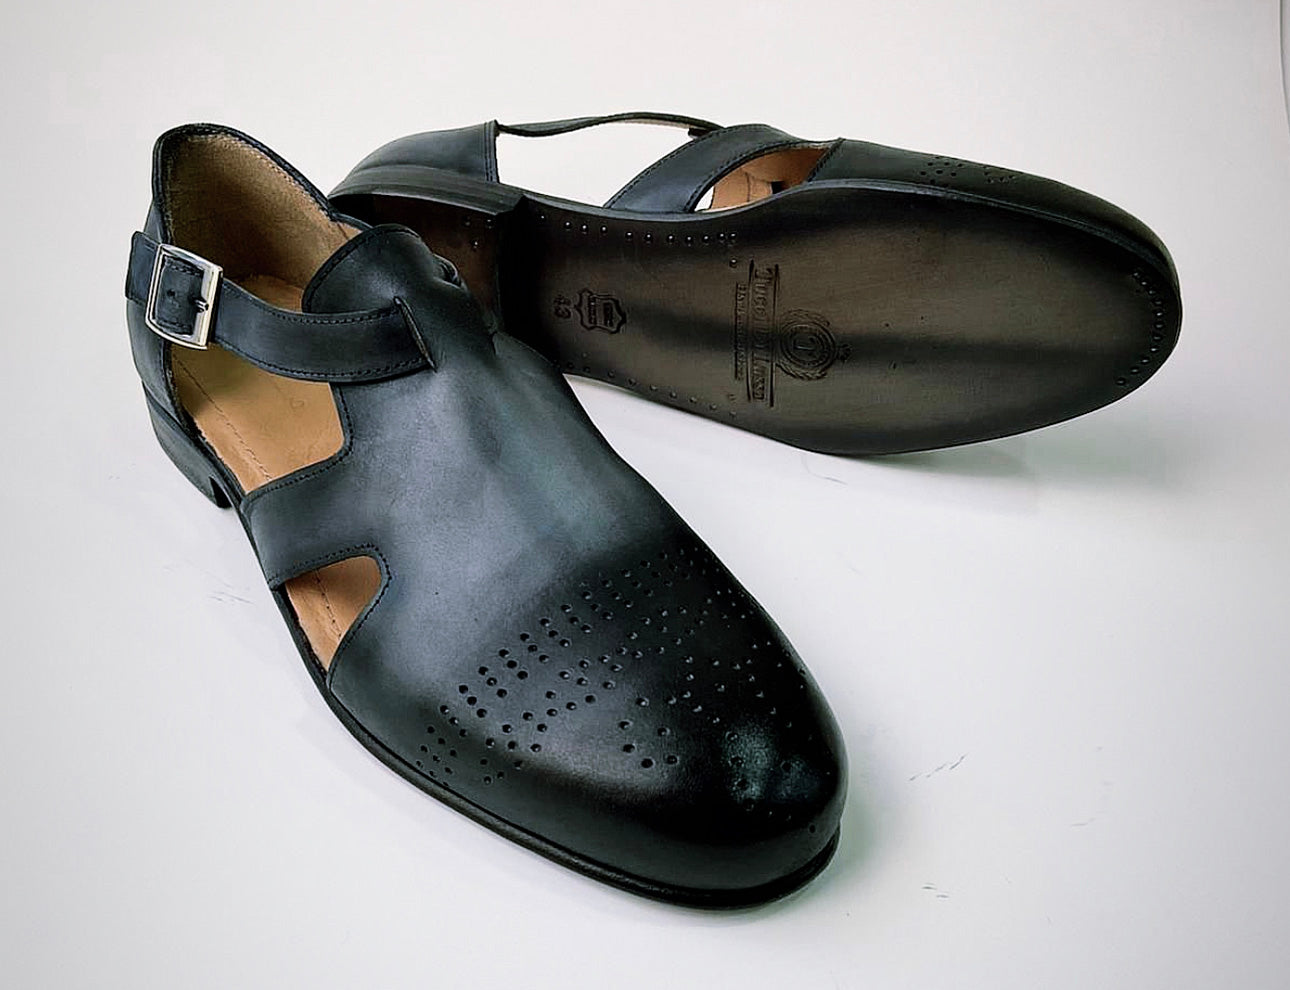 Tucci Di Lusso Mens Gray-Black Handcrafted Italian all Leather Luxury Dress Single Buckle Brogue Sandals